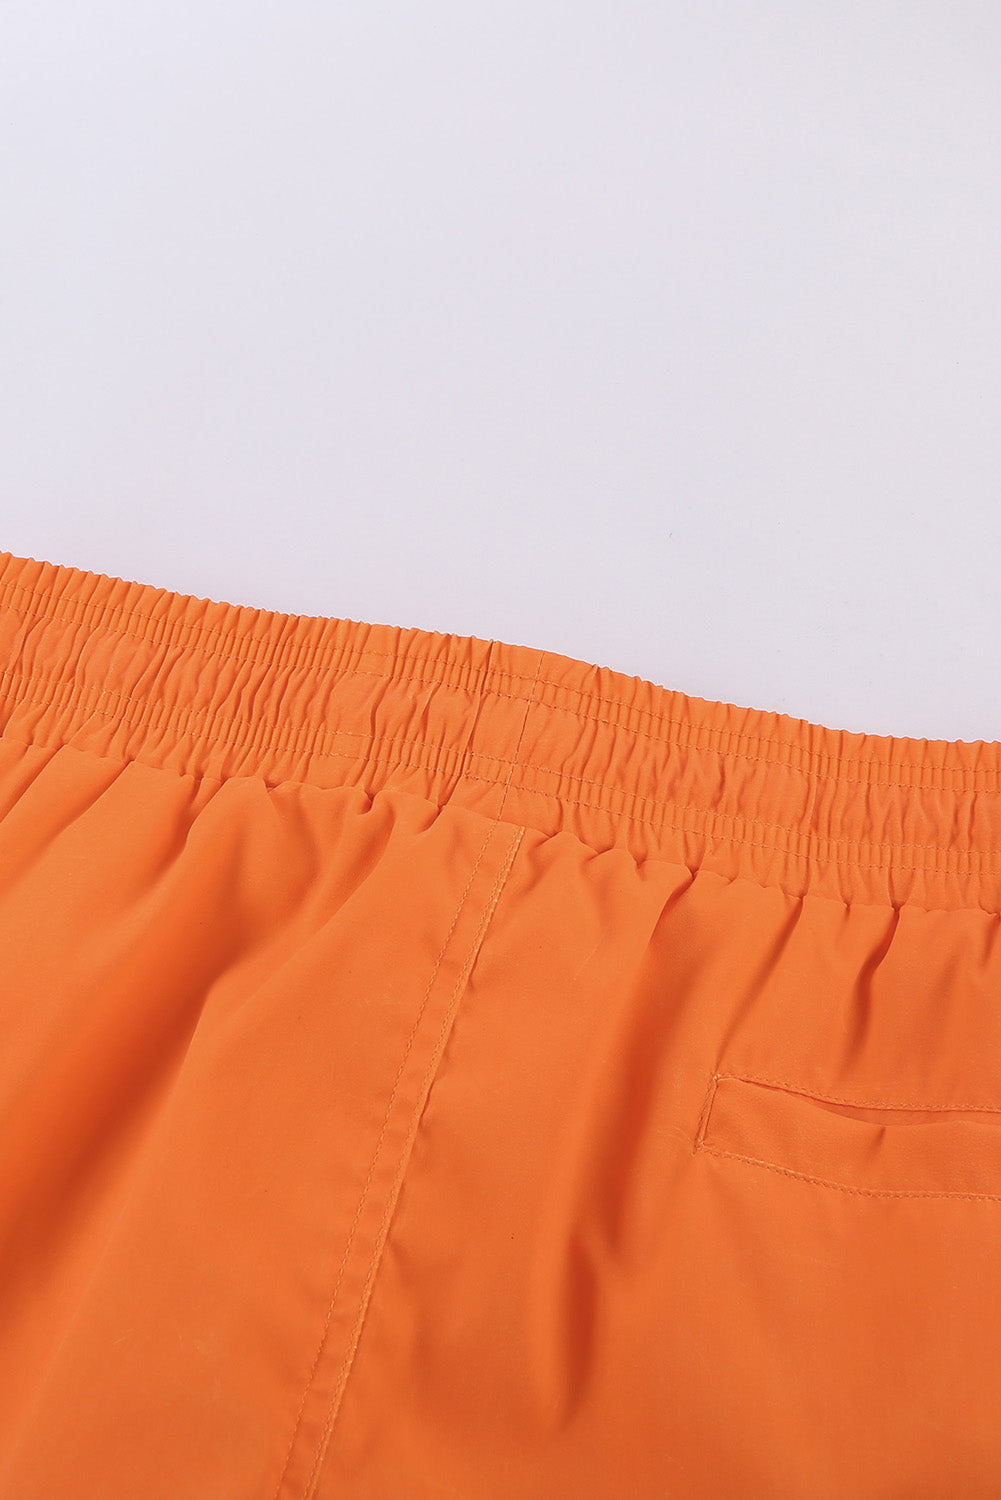 Orange Womens Summer Thermochromic Sports Casual Shorts LC73678-14